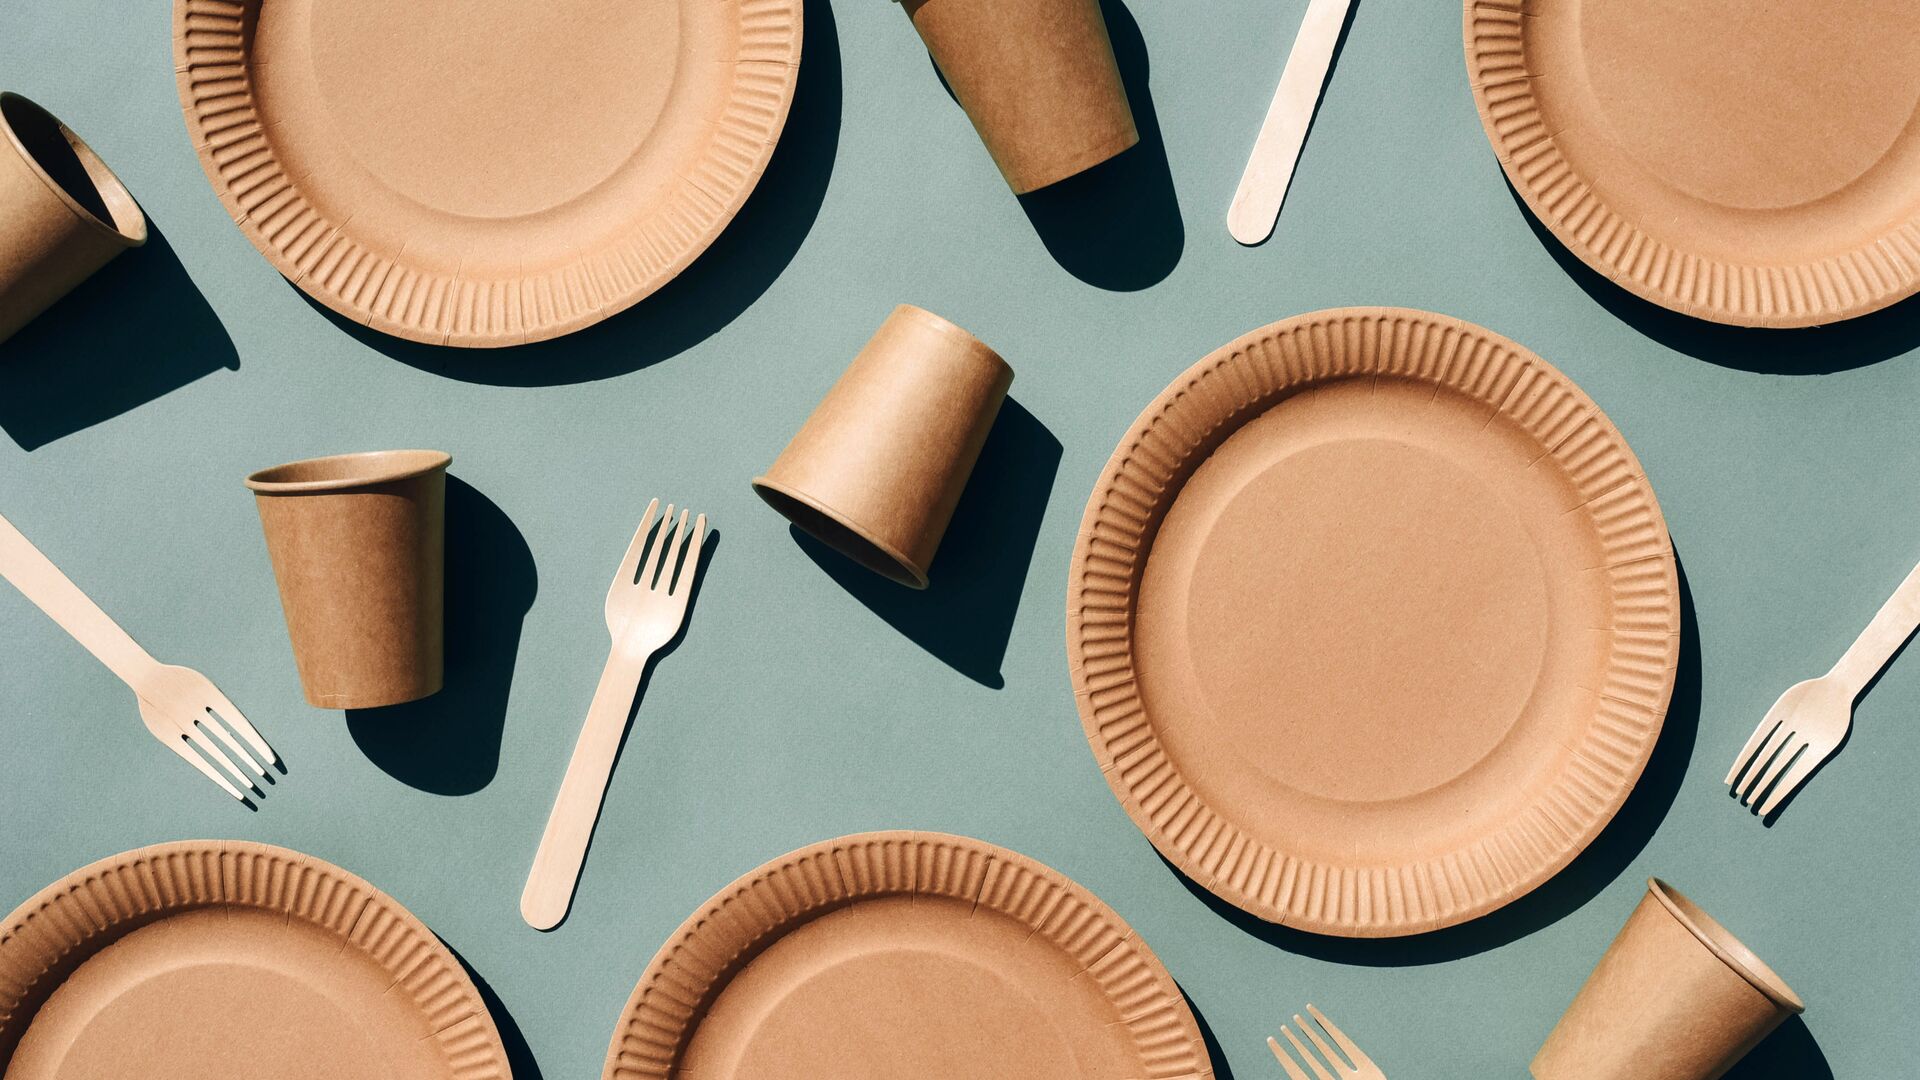 A shot looking down on Biodegradable utensils, plates, and cups against a blue-green background representing our recent podcast with Chipotle on their ESG priorities.